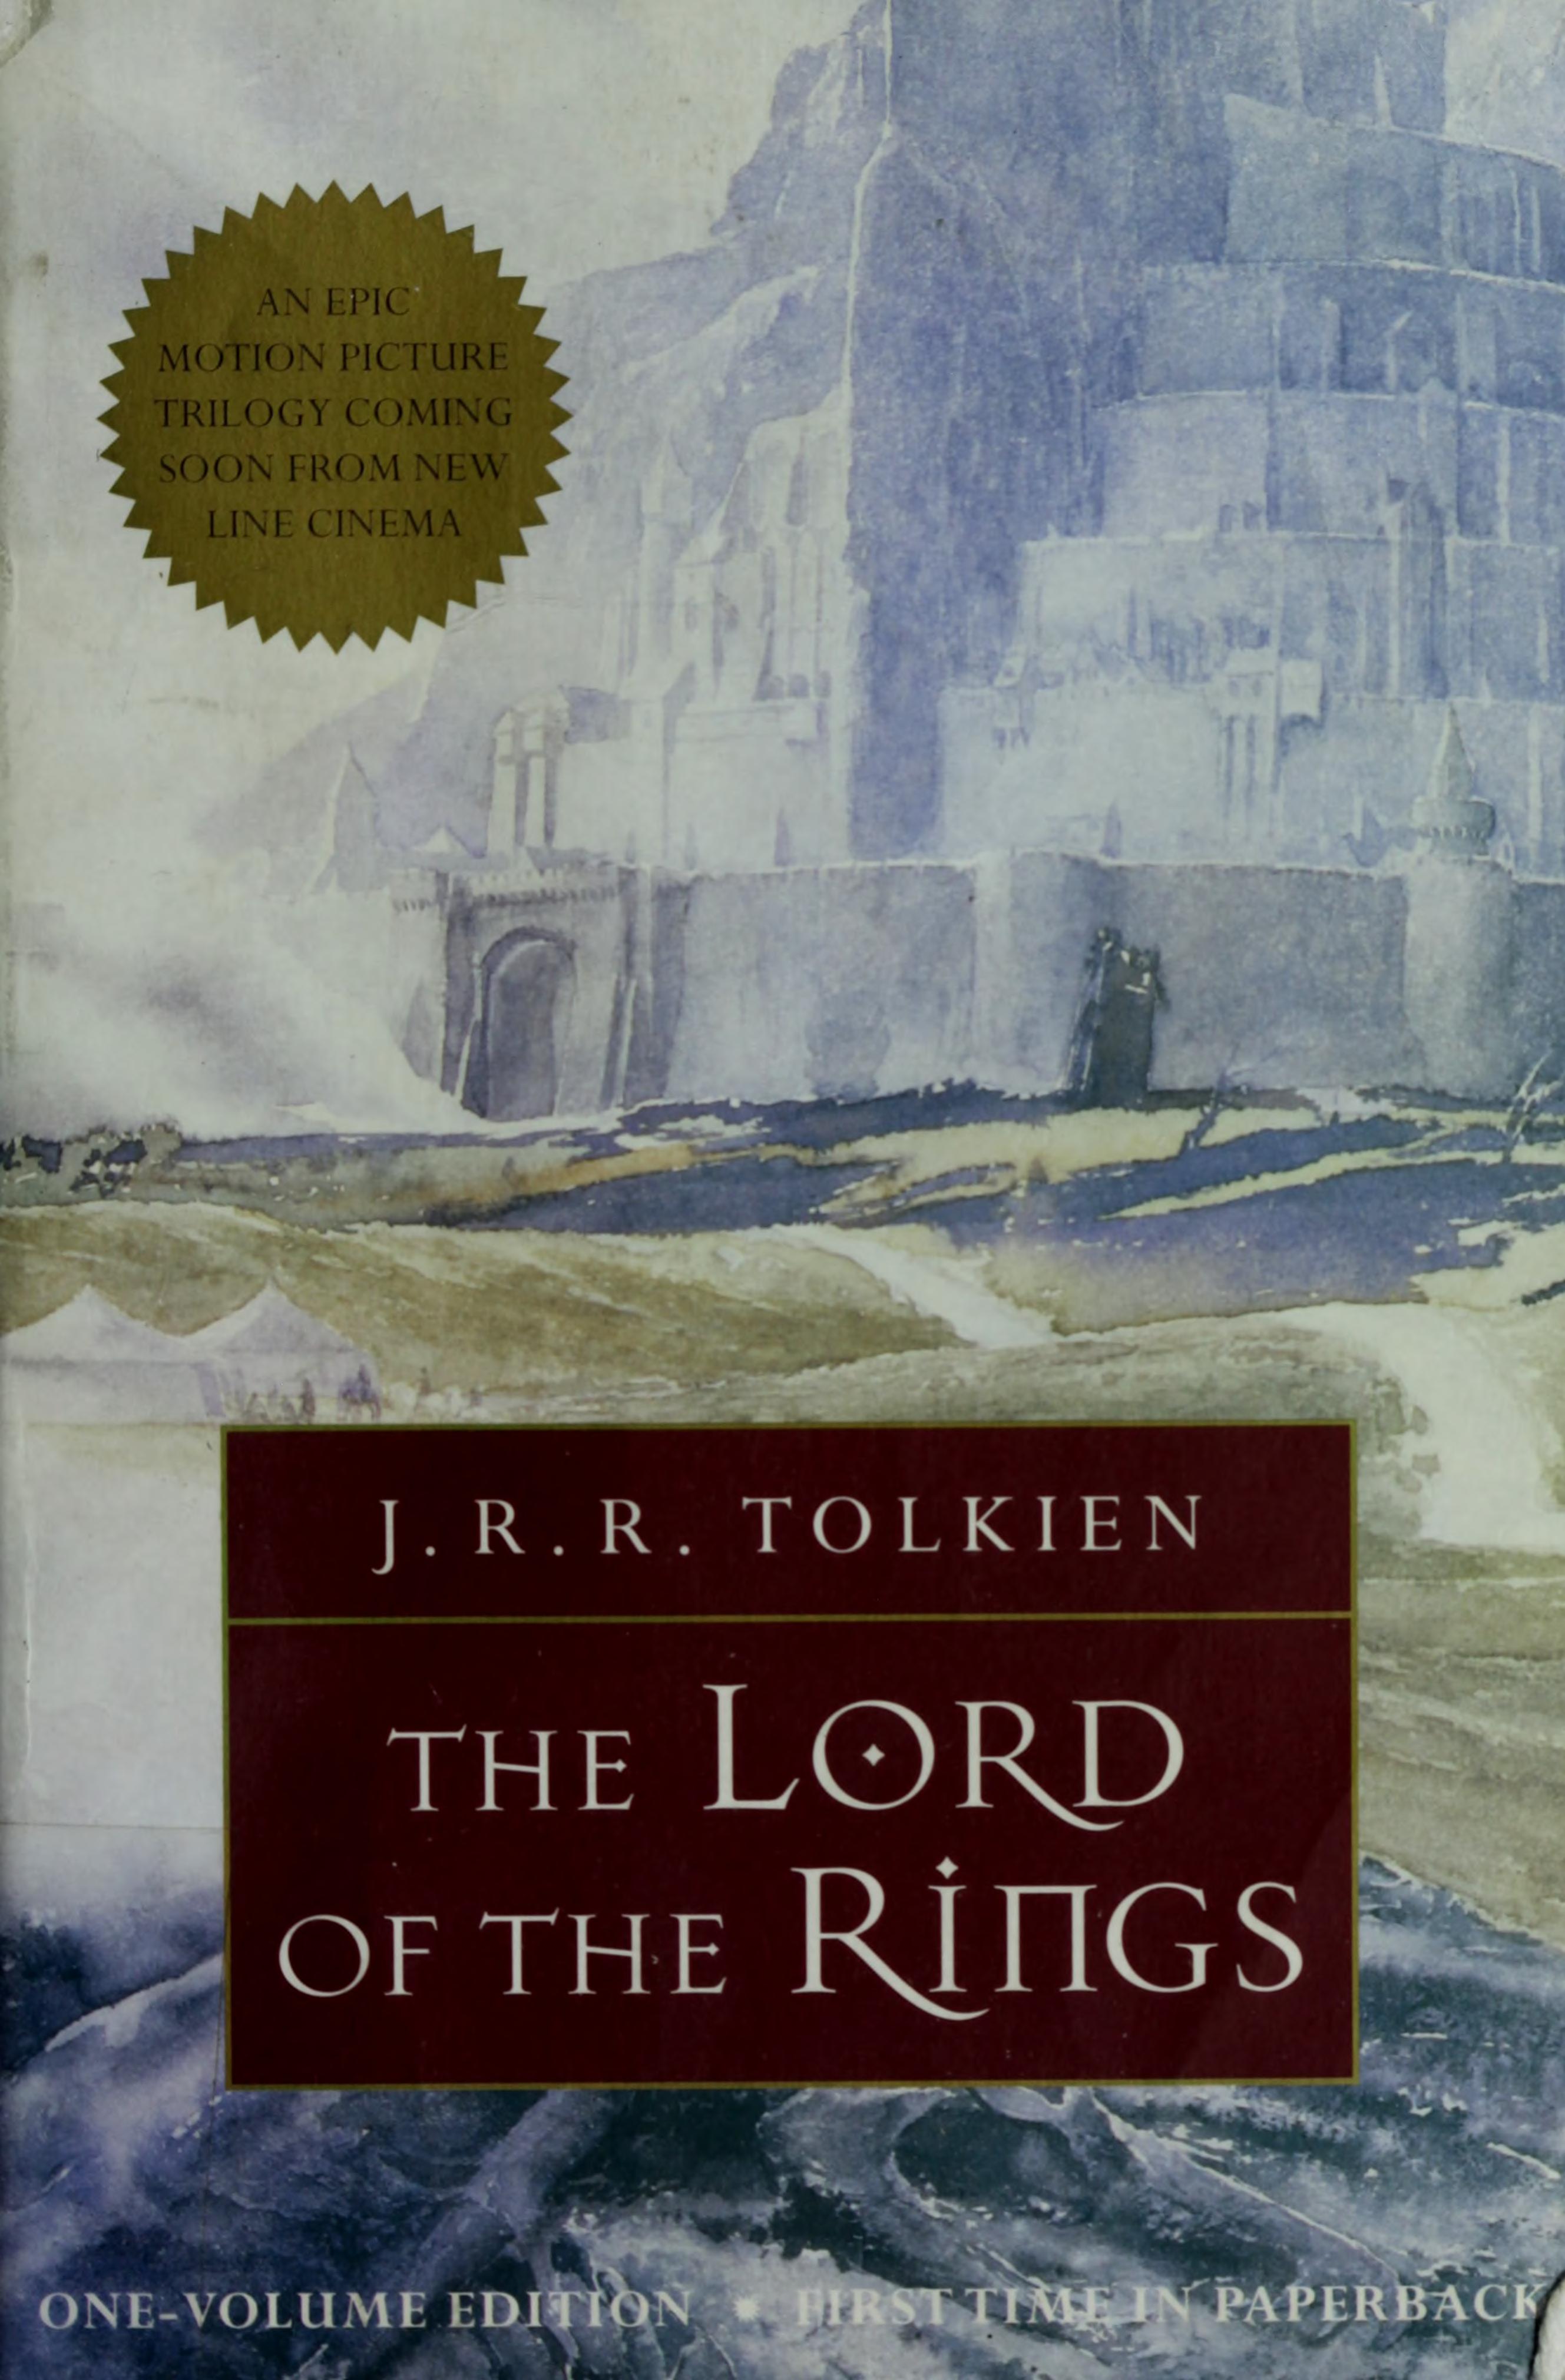 J.R.R. Tolkien: The Lord of the Rings (Paperback, 1999, Houghton Mifflin)